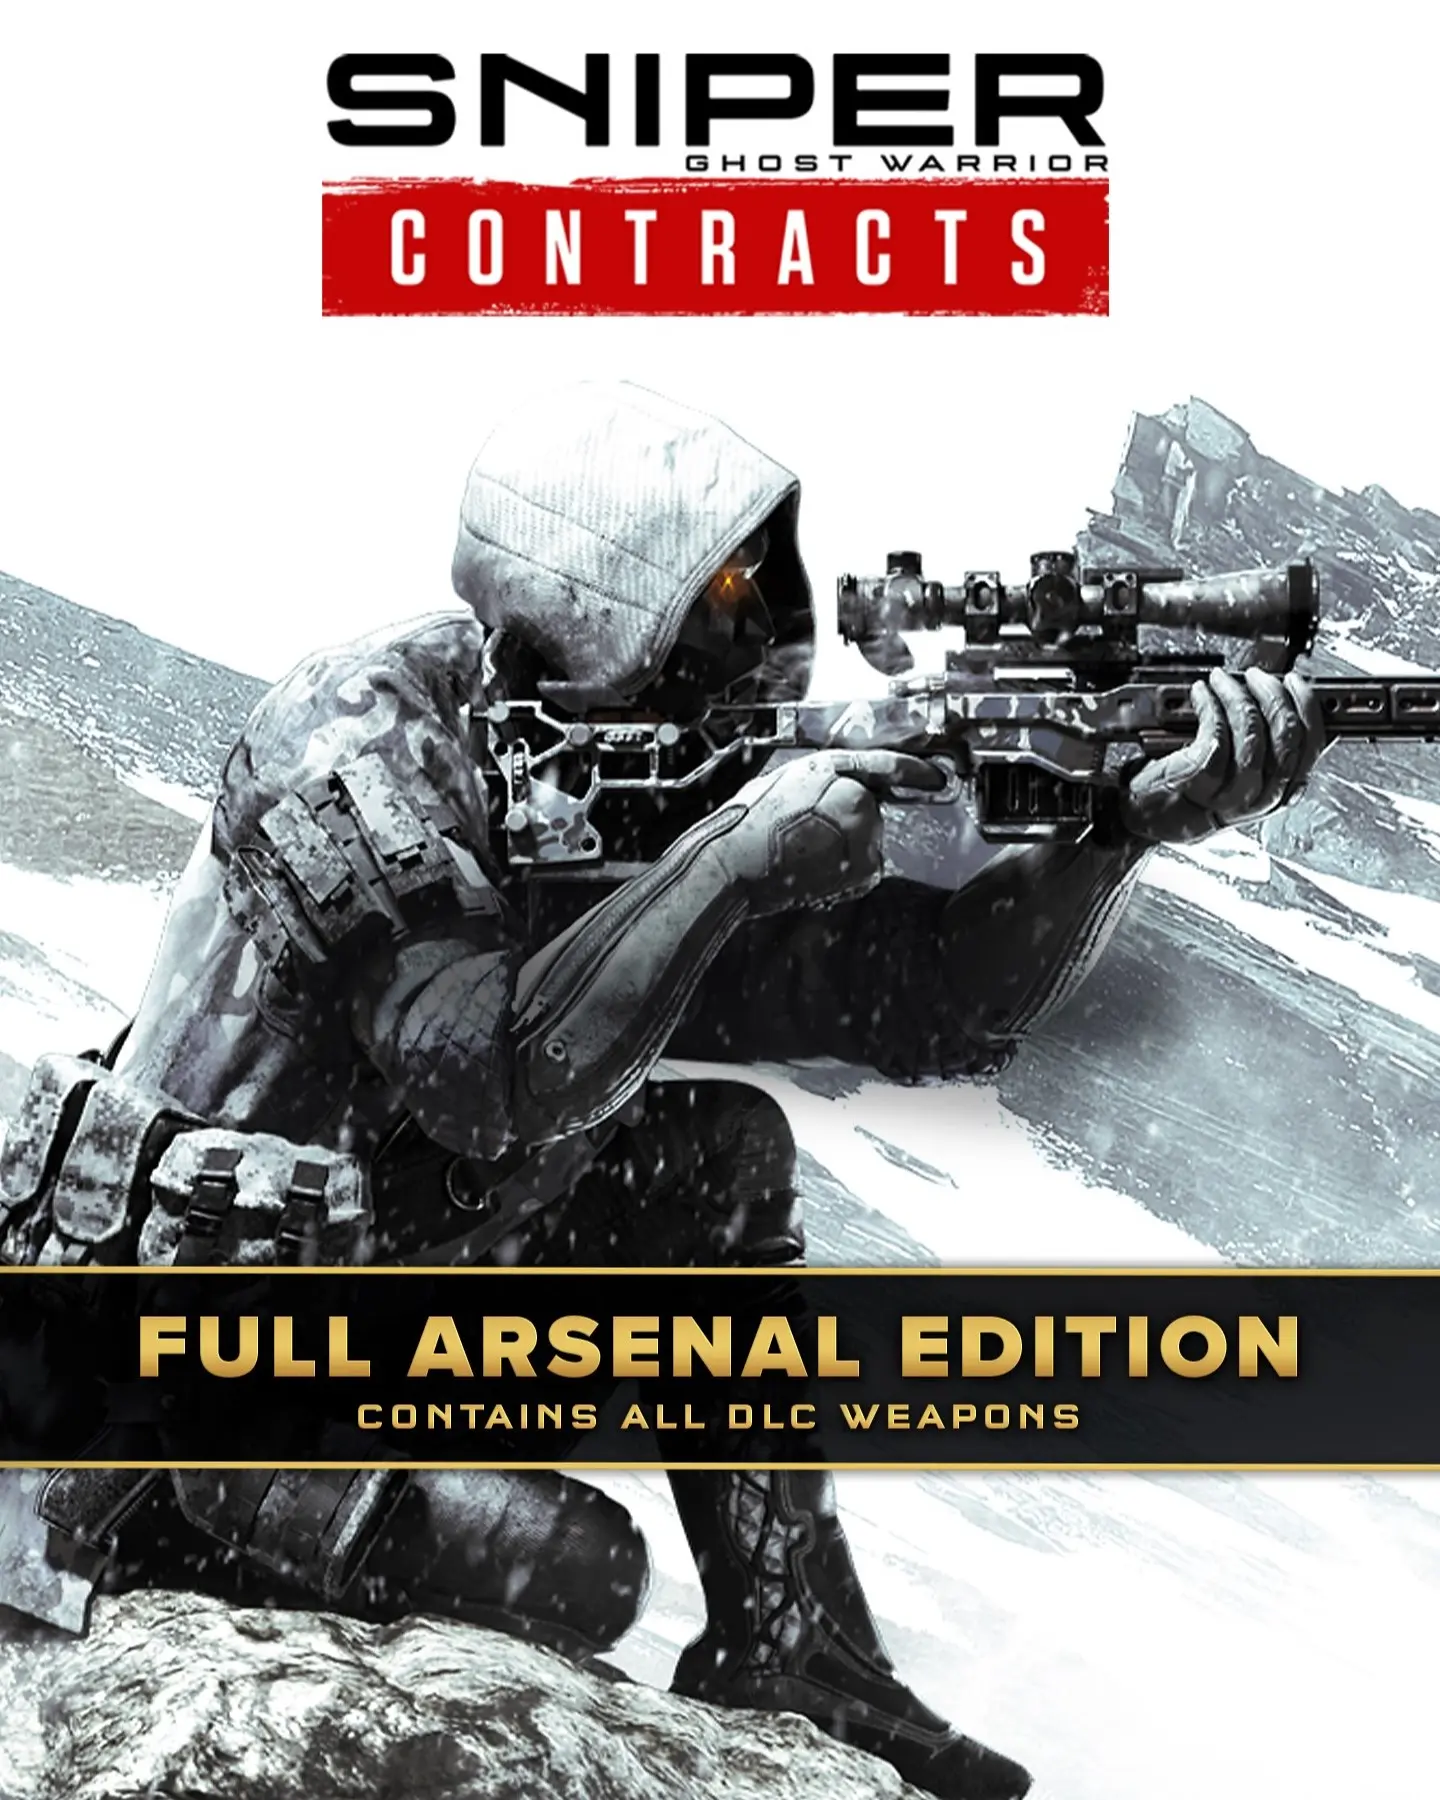 Sniper Ghost Warrior Contracts Full Arsenal Edition (AR) (Xbox One / Xbox Series X|S) - Xbox Live - Digital Code